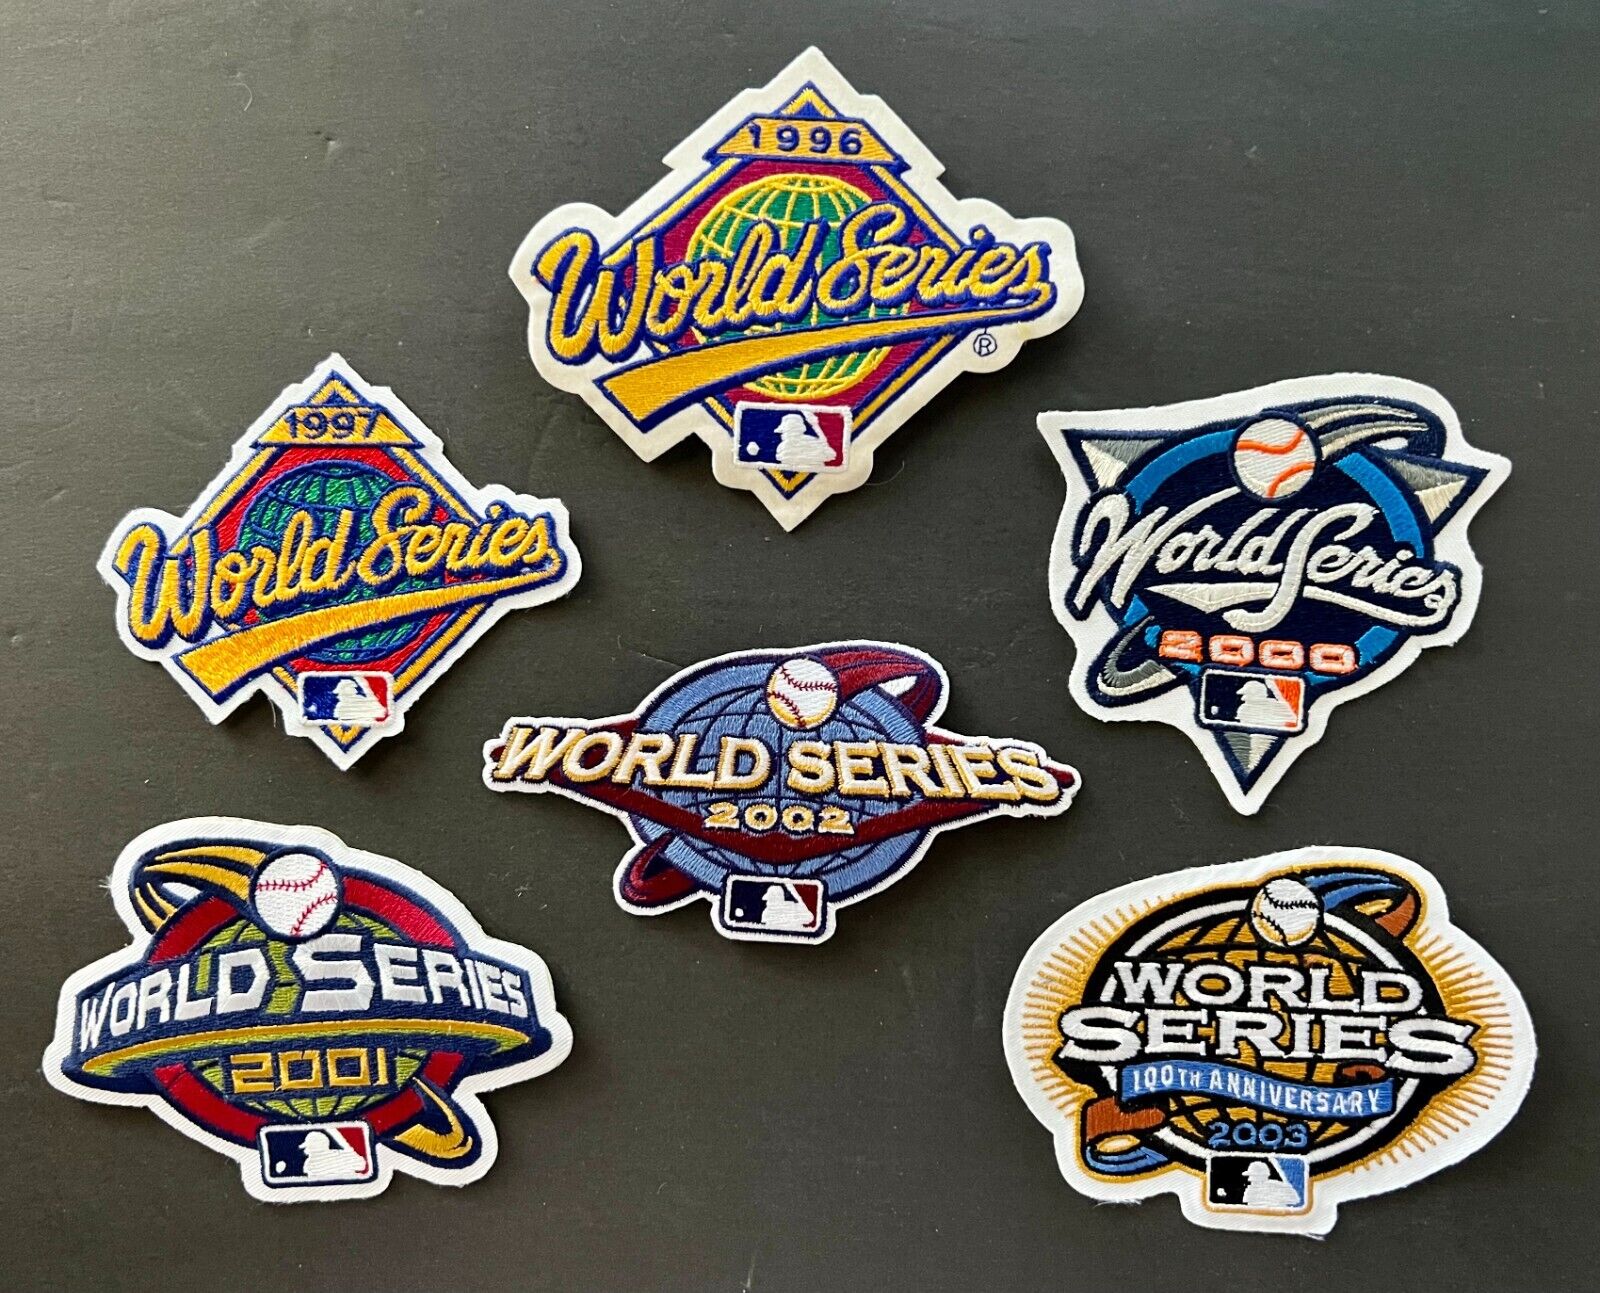 MLB WORLD SERIES SPECIAL - ANY ONE OF THESE WS PATCHES FOR $9.95 EA. - U PICK